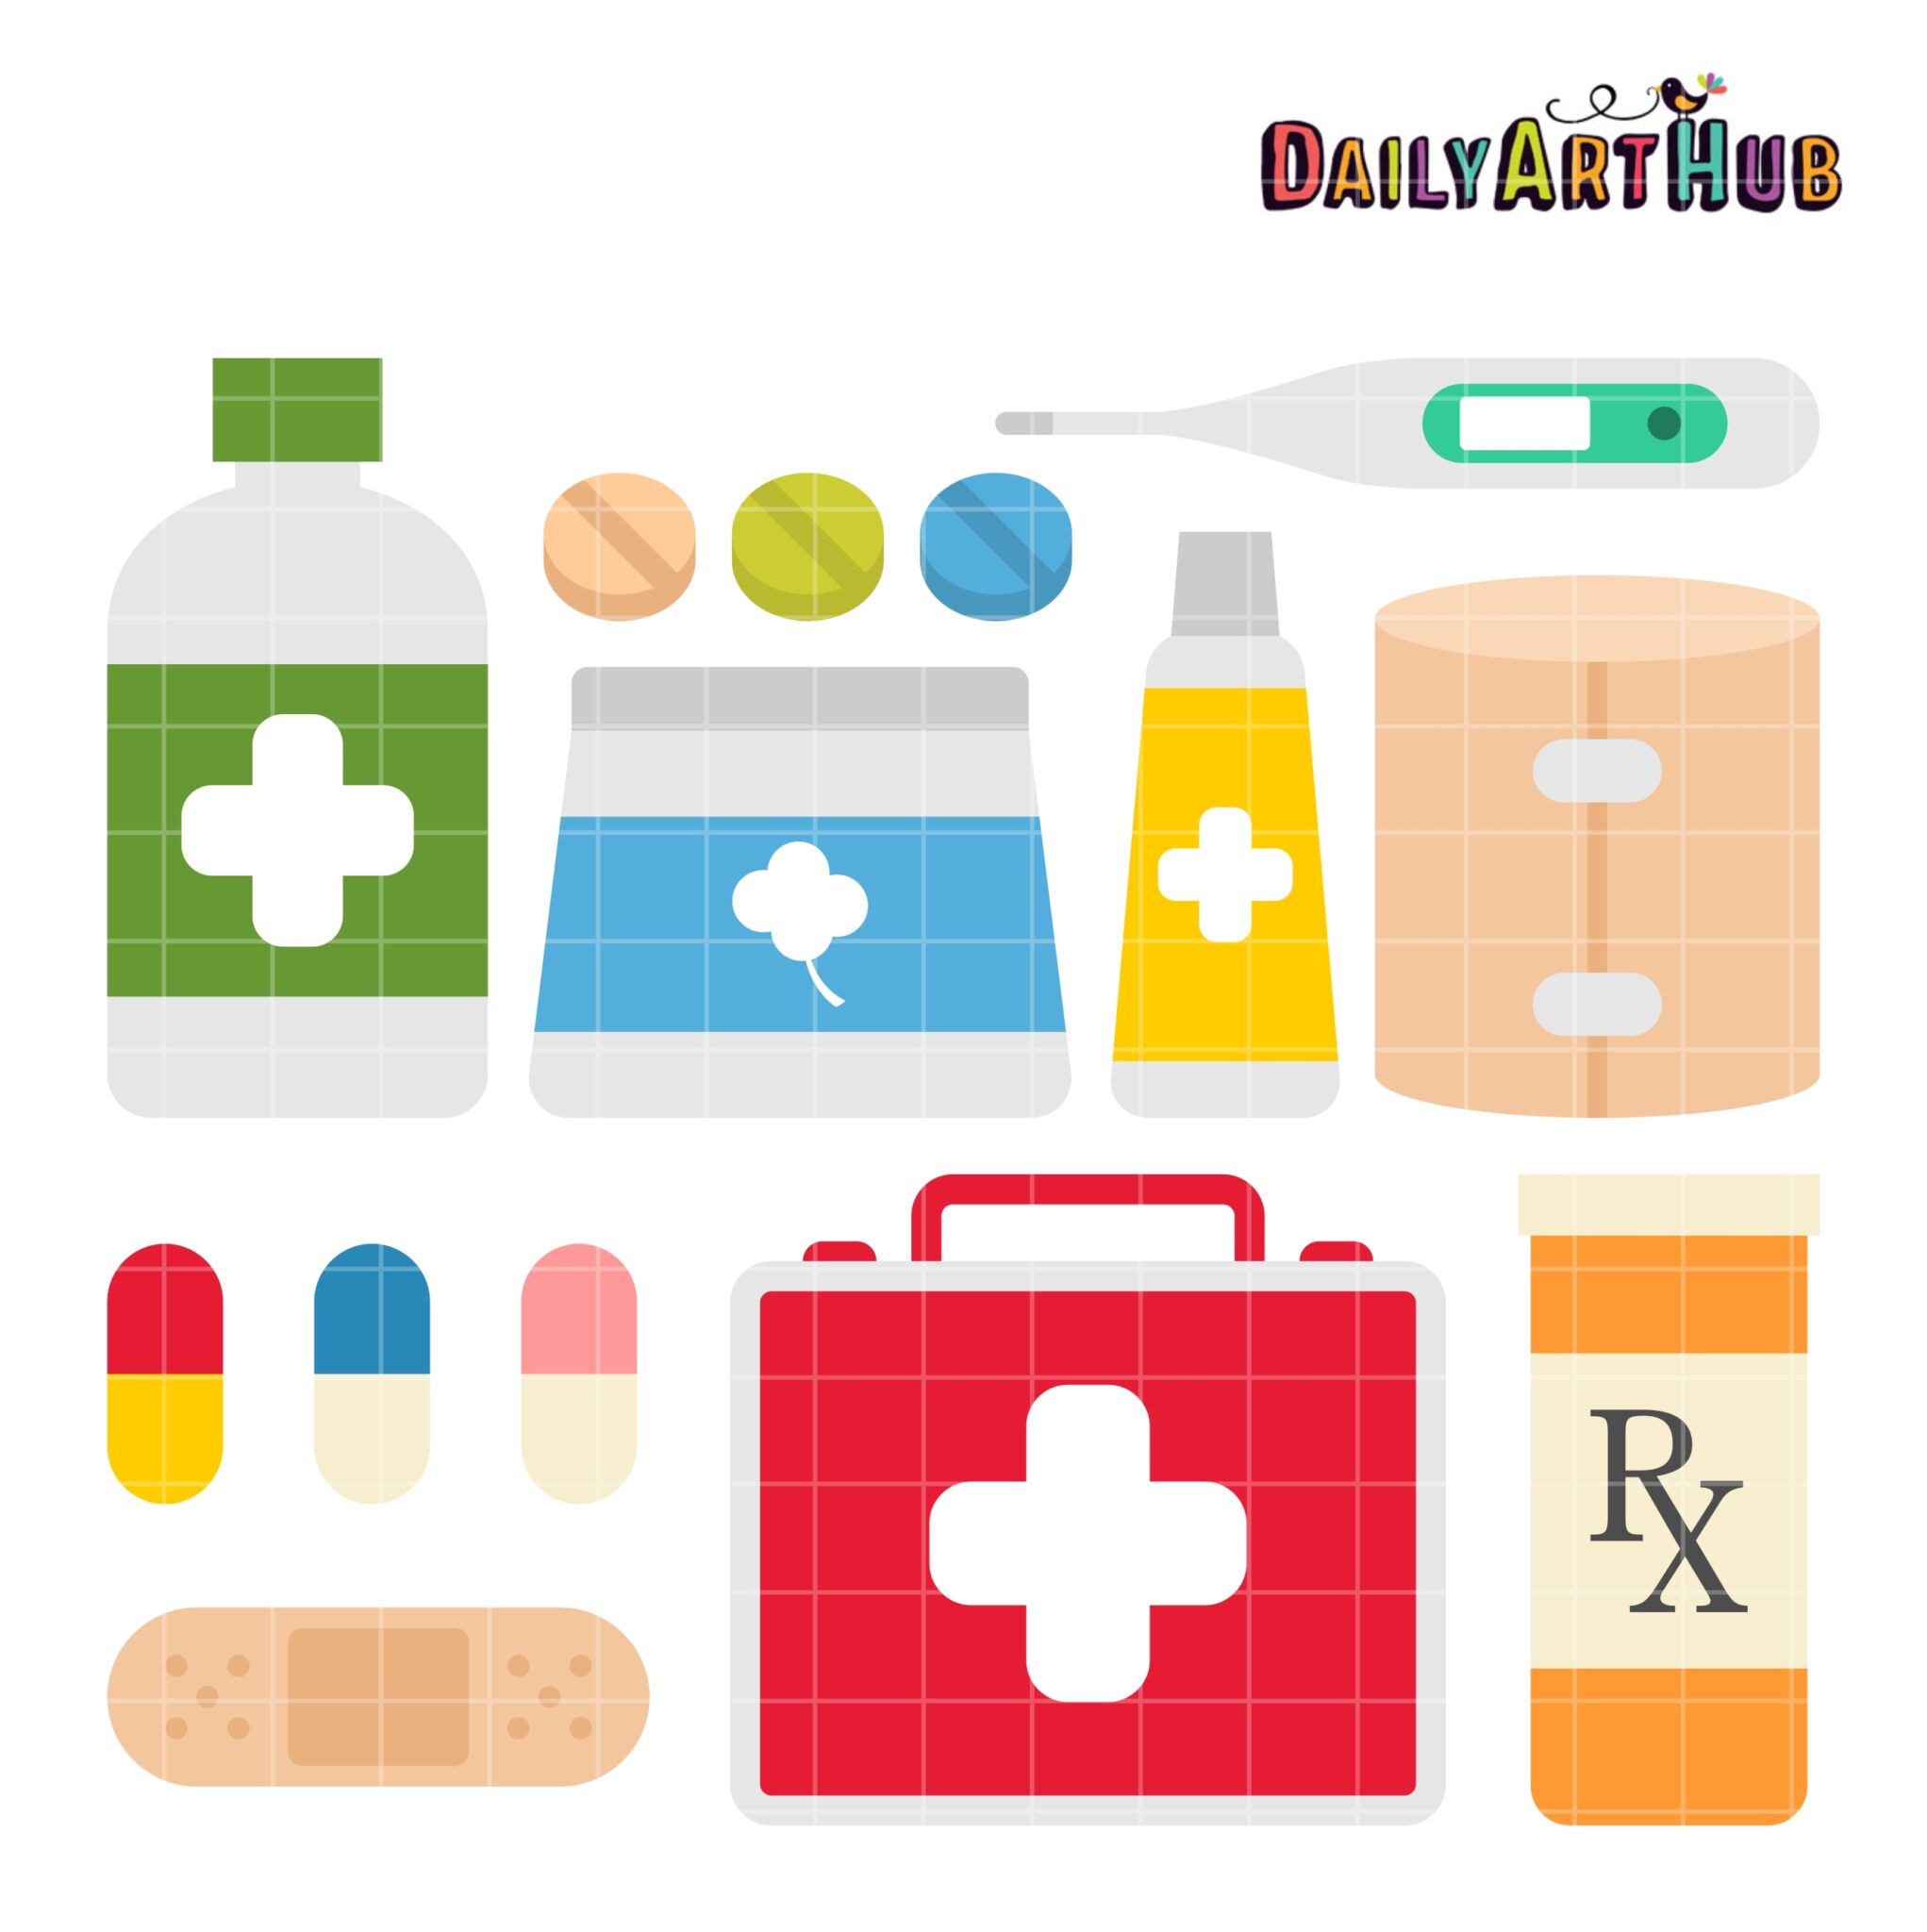 first aid kit clipart